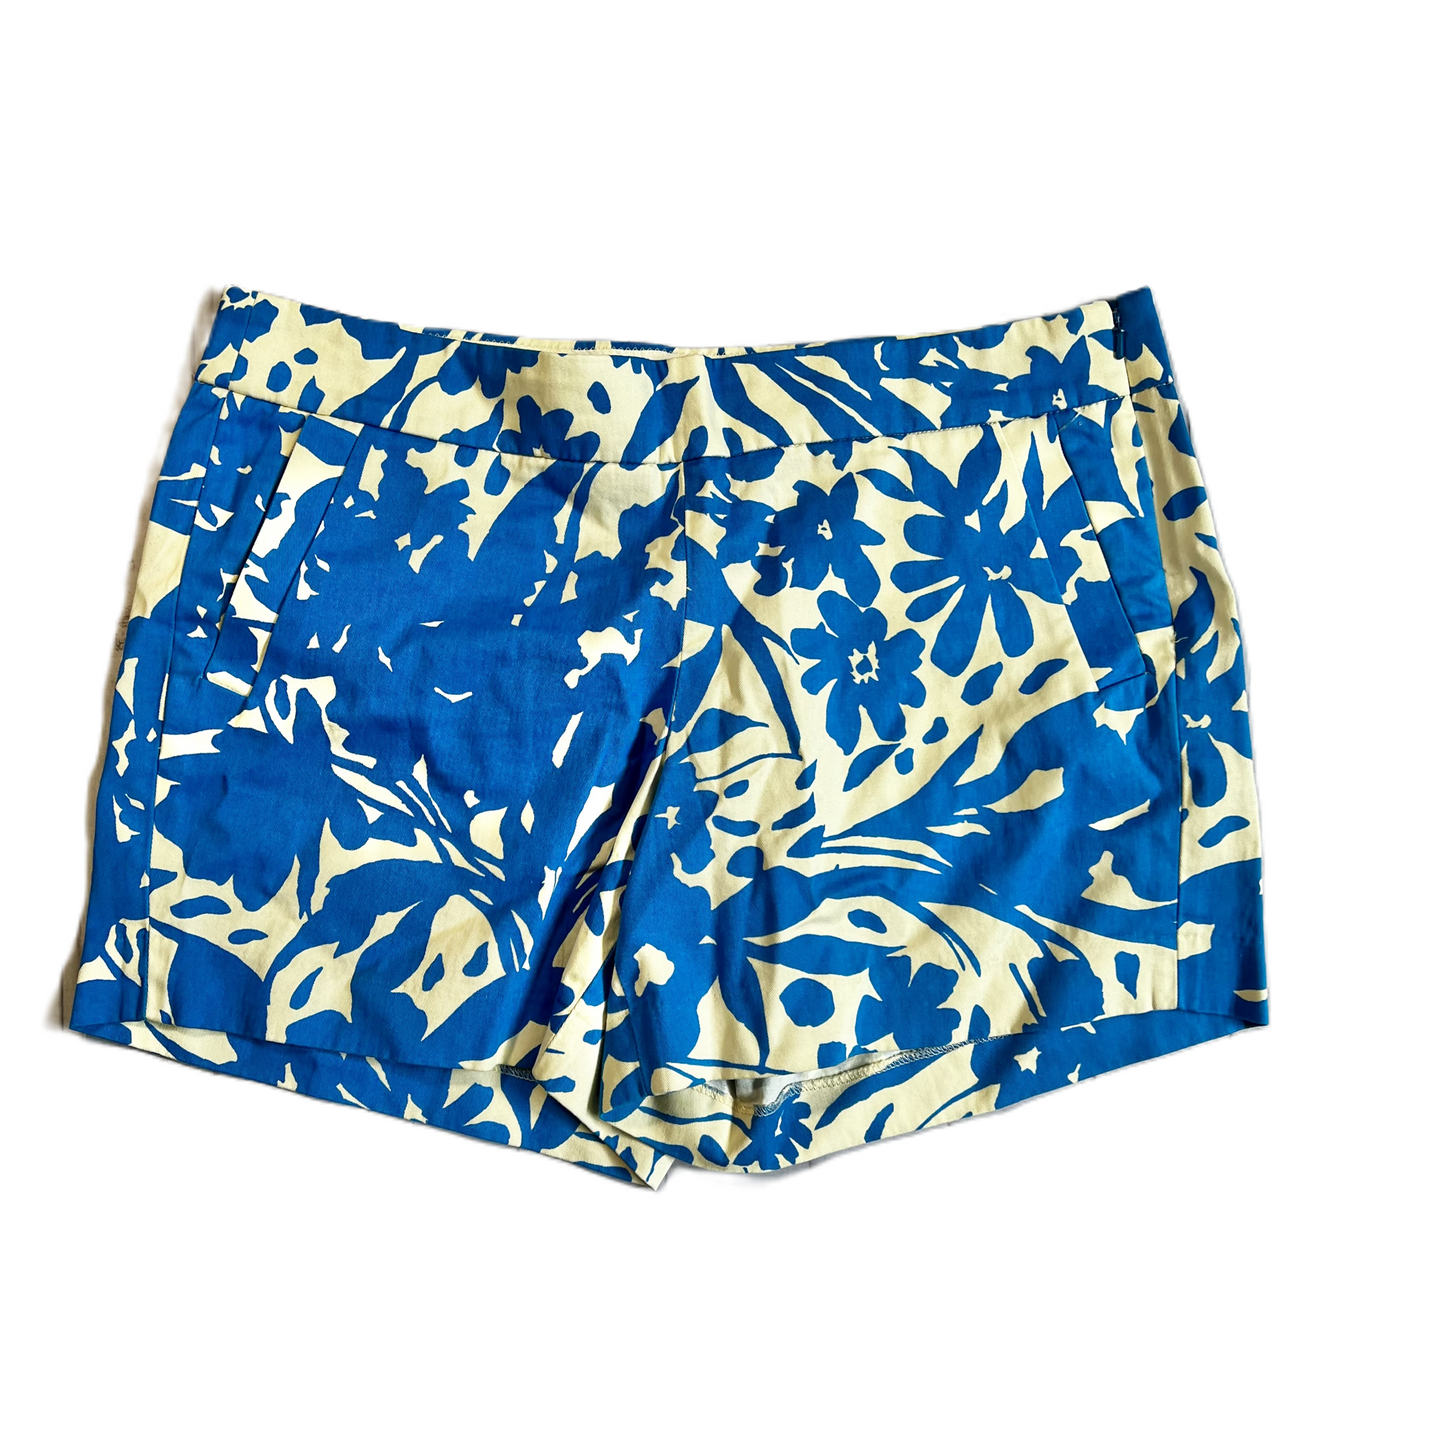 Blue & White Shorts By J. Crew, Size: 12